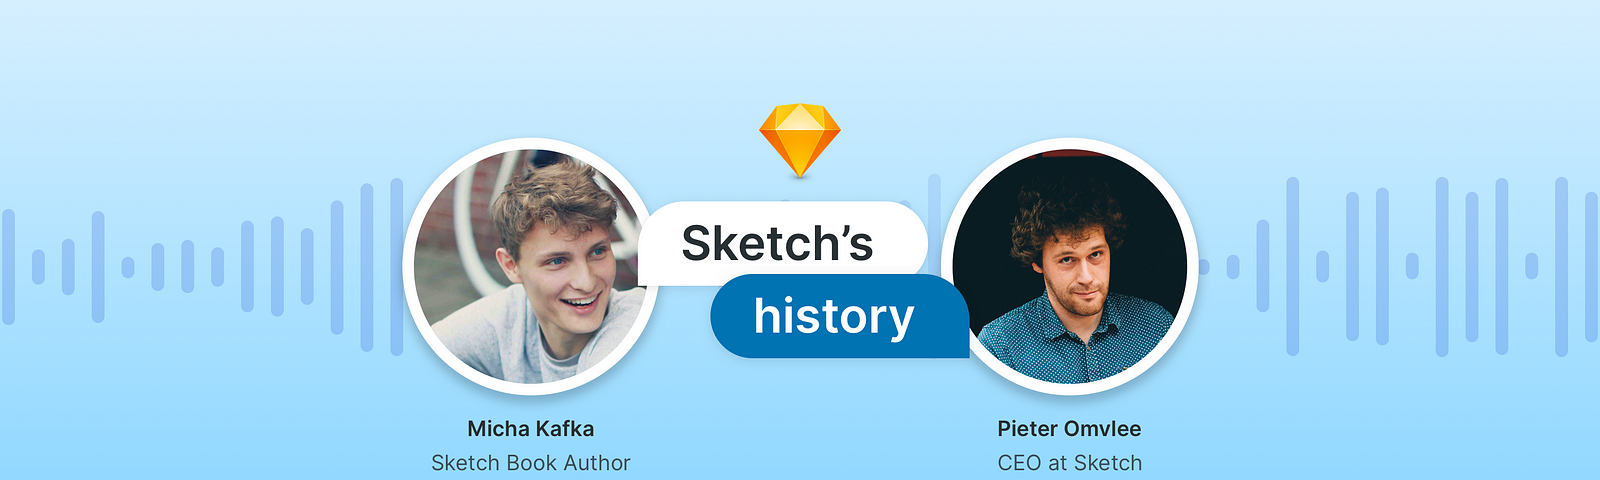 Micha Kafka, Sketch Book Author and Pieter Omvlee, CEO at Sketch talk about the tools history.